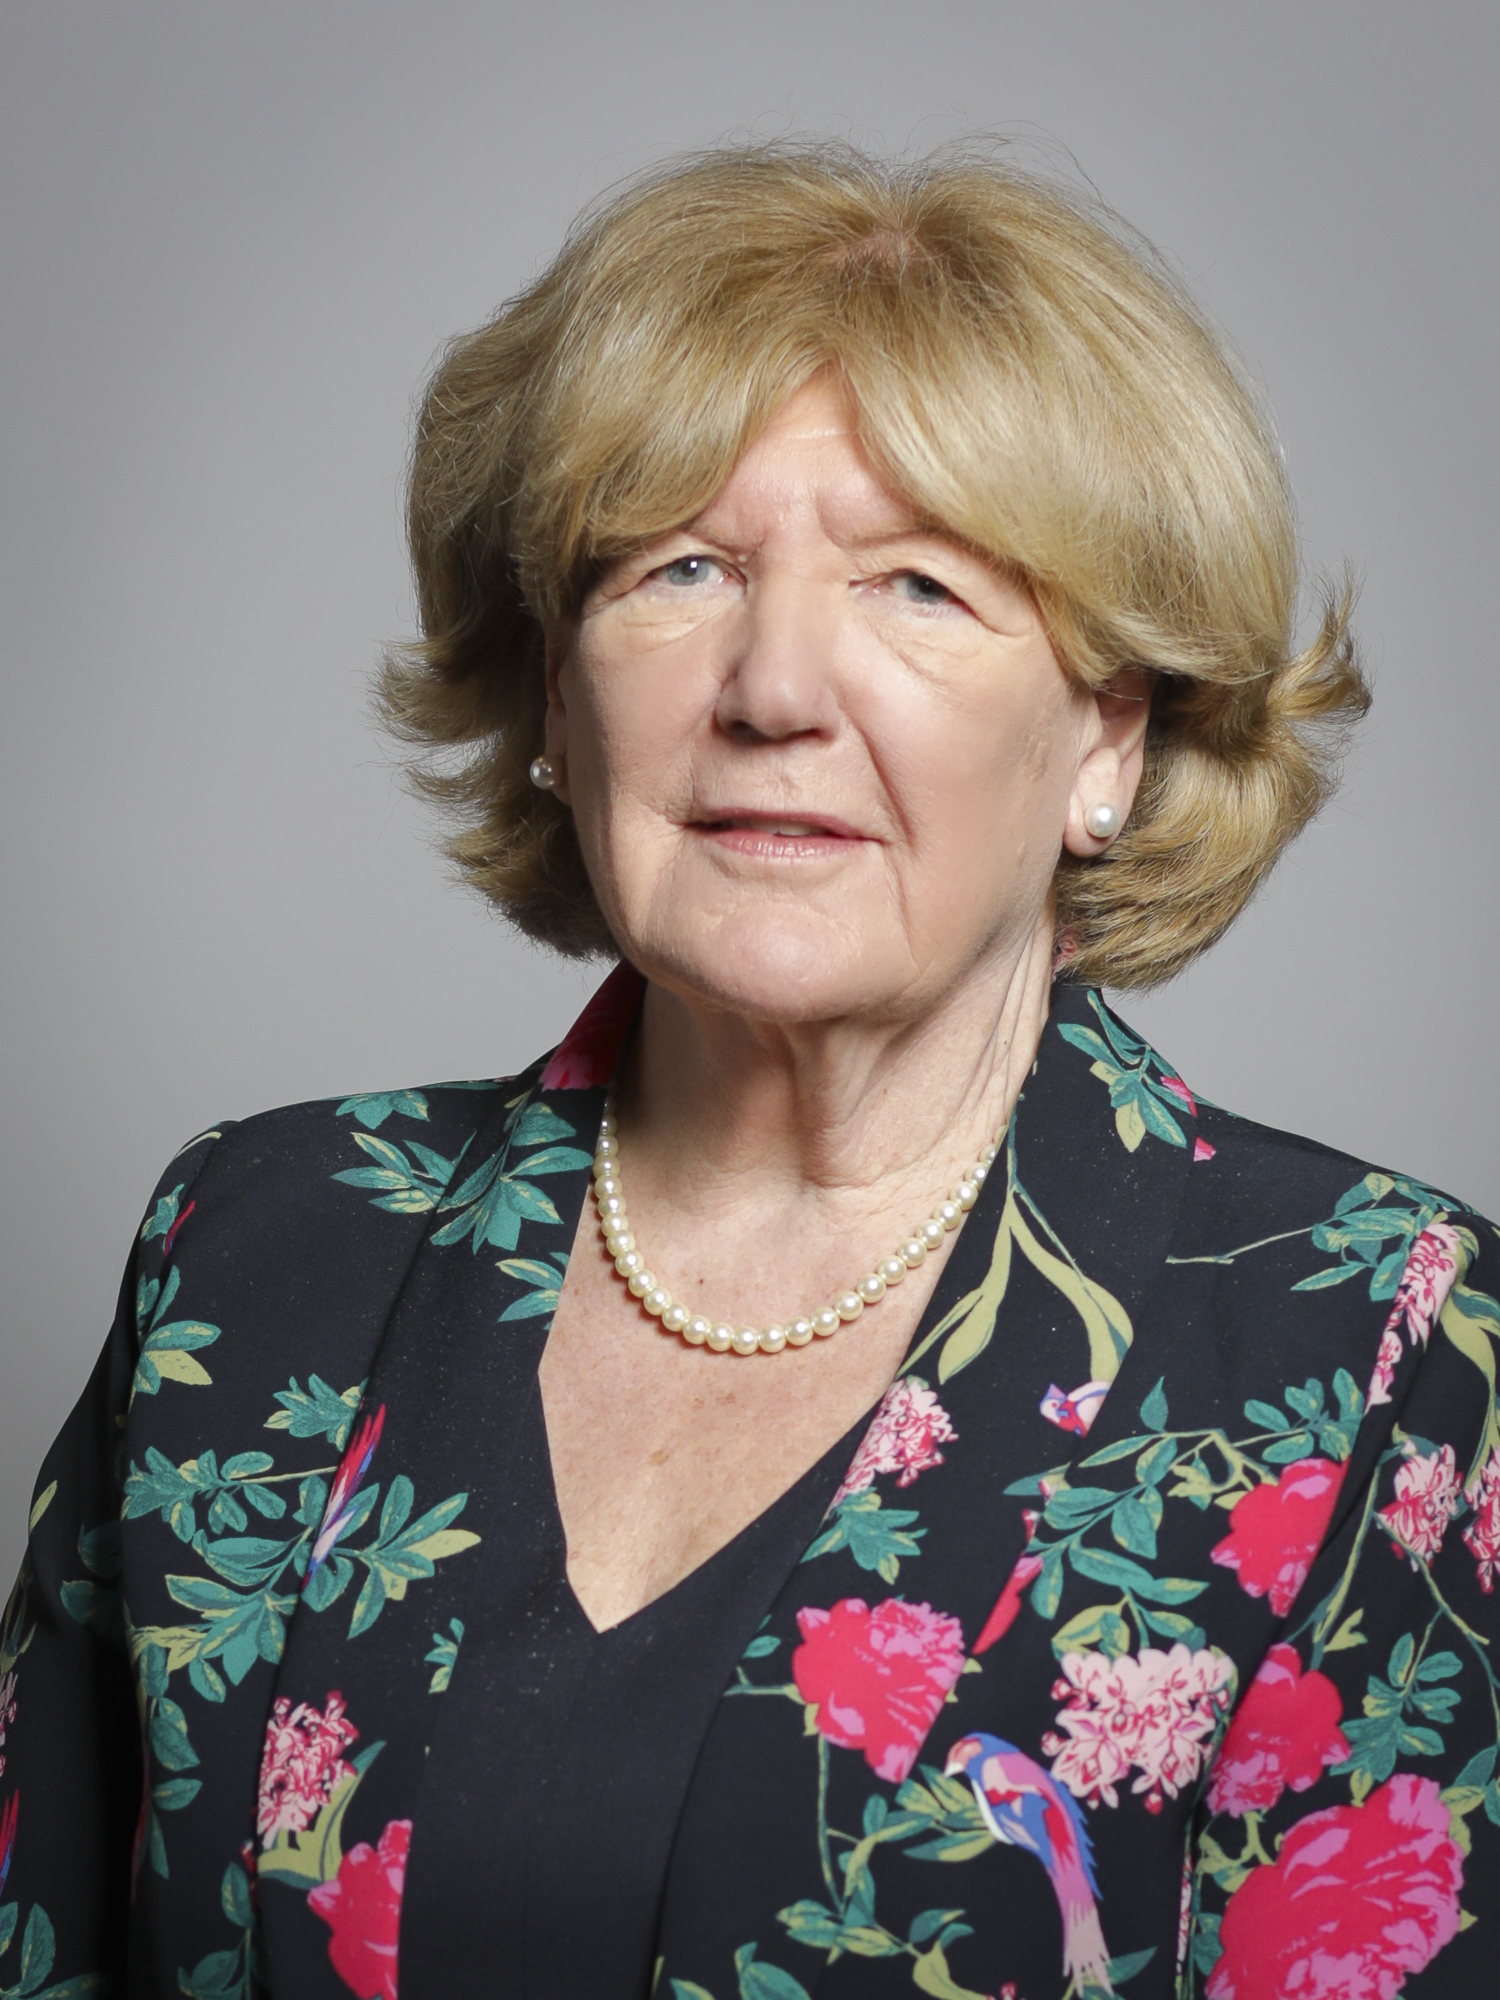 https://upload.wikimedia.org/wikipedia/commons/1/1b/Official_portrait_of_Baroness_Taylor_of_Bolton_crop_2%2C_2019.jpg